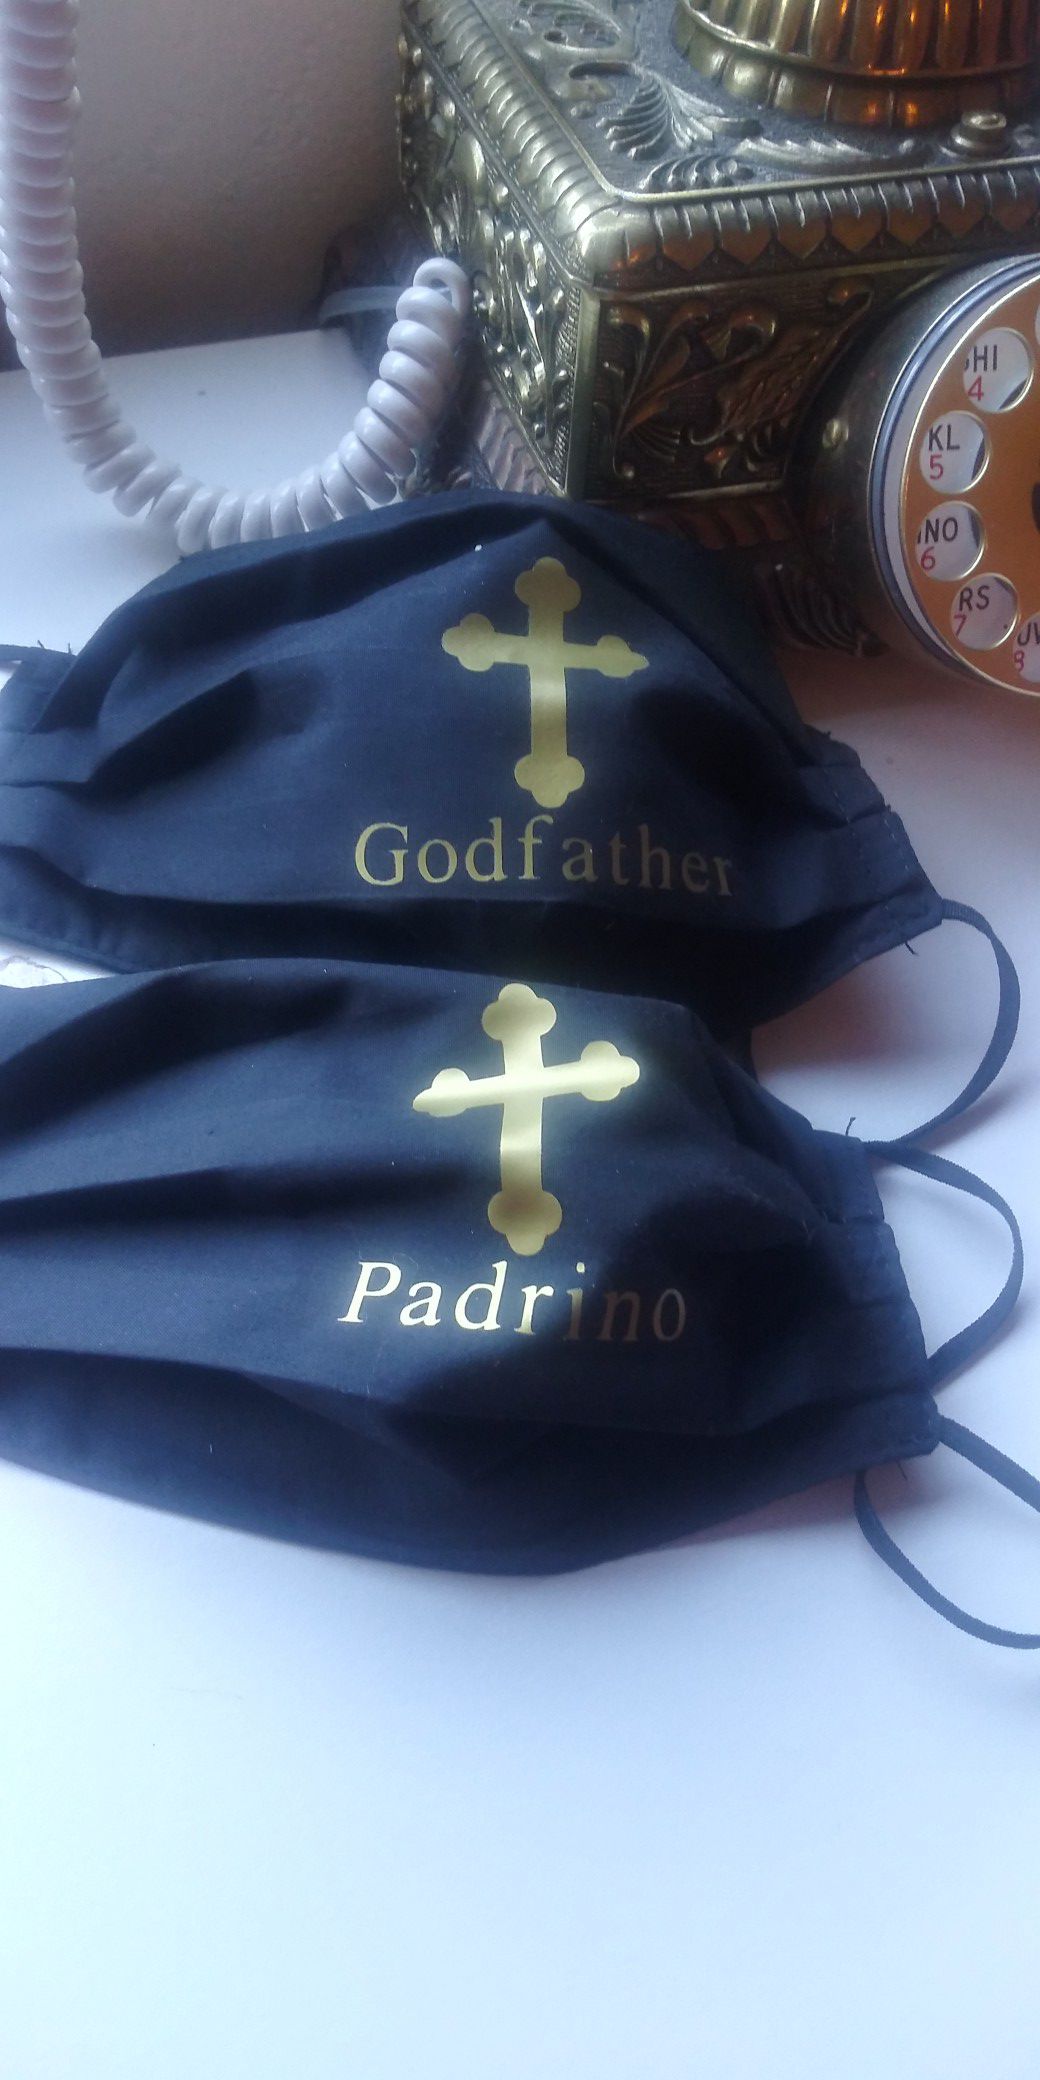 Padrino Godfather Family Cover